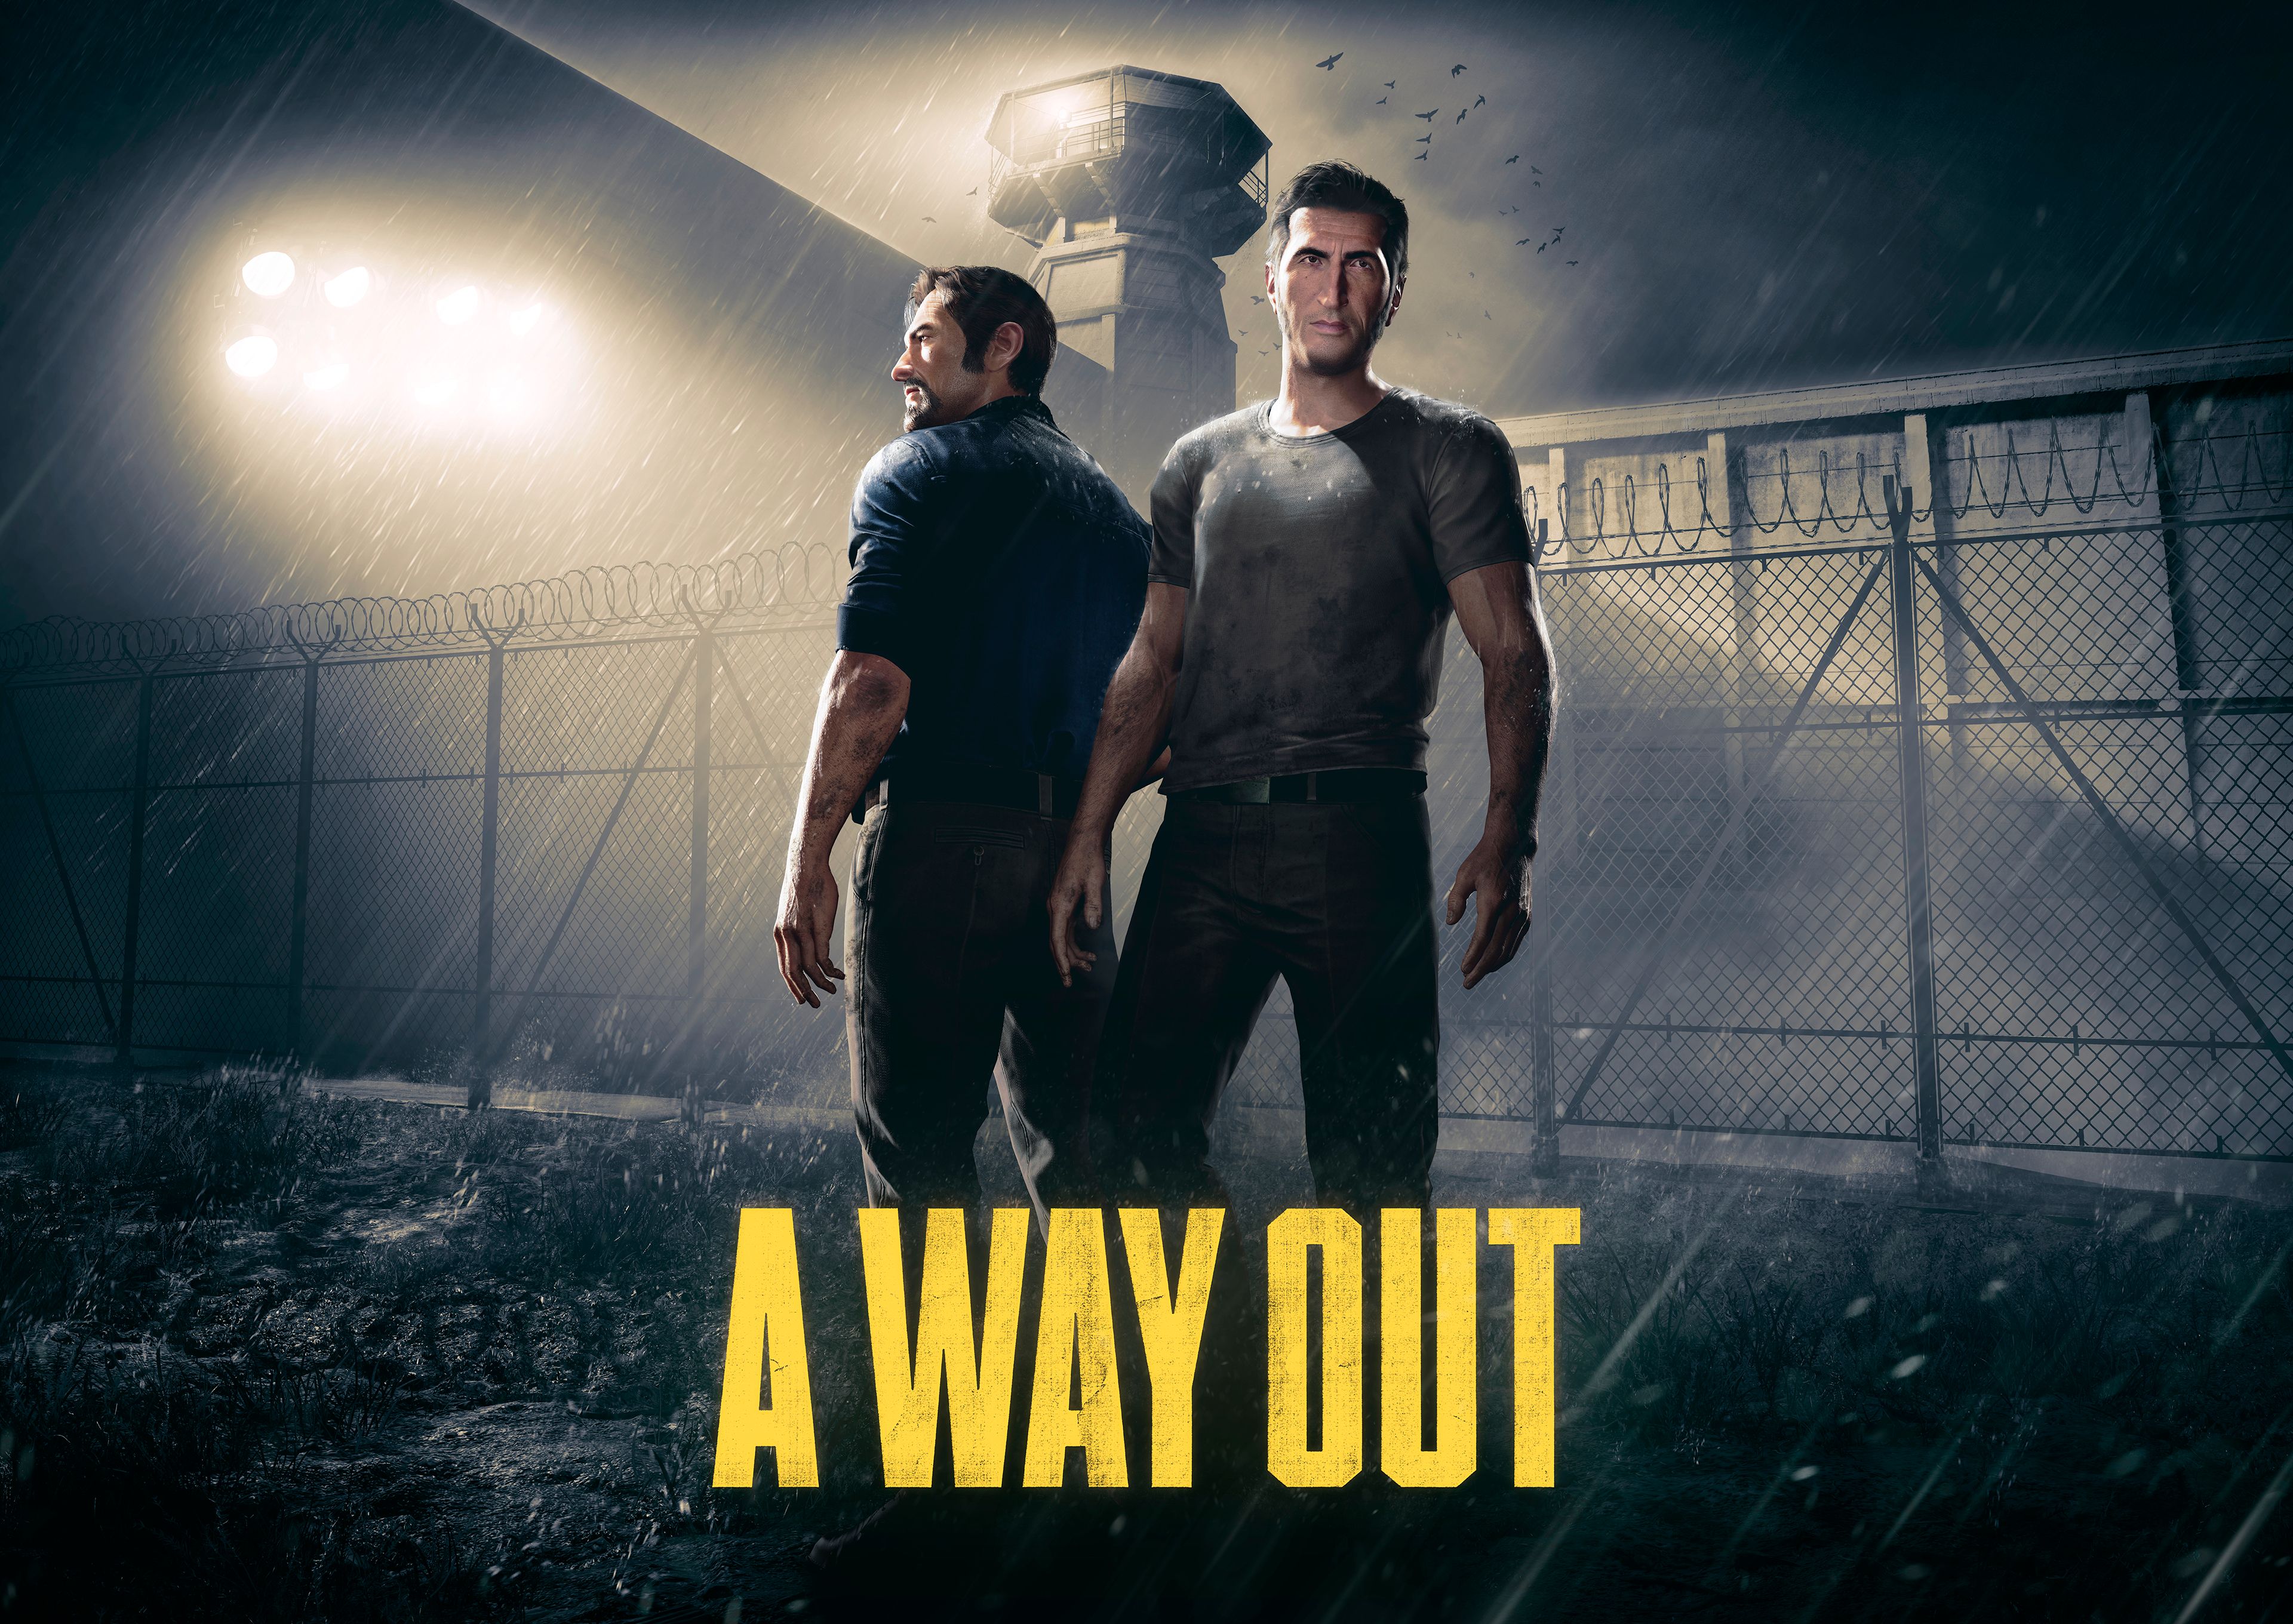 A Way Out - Review: A Way Out - The Enemy